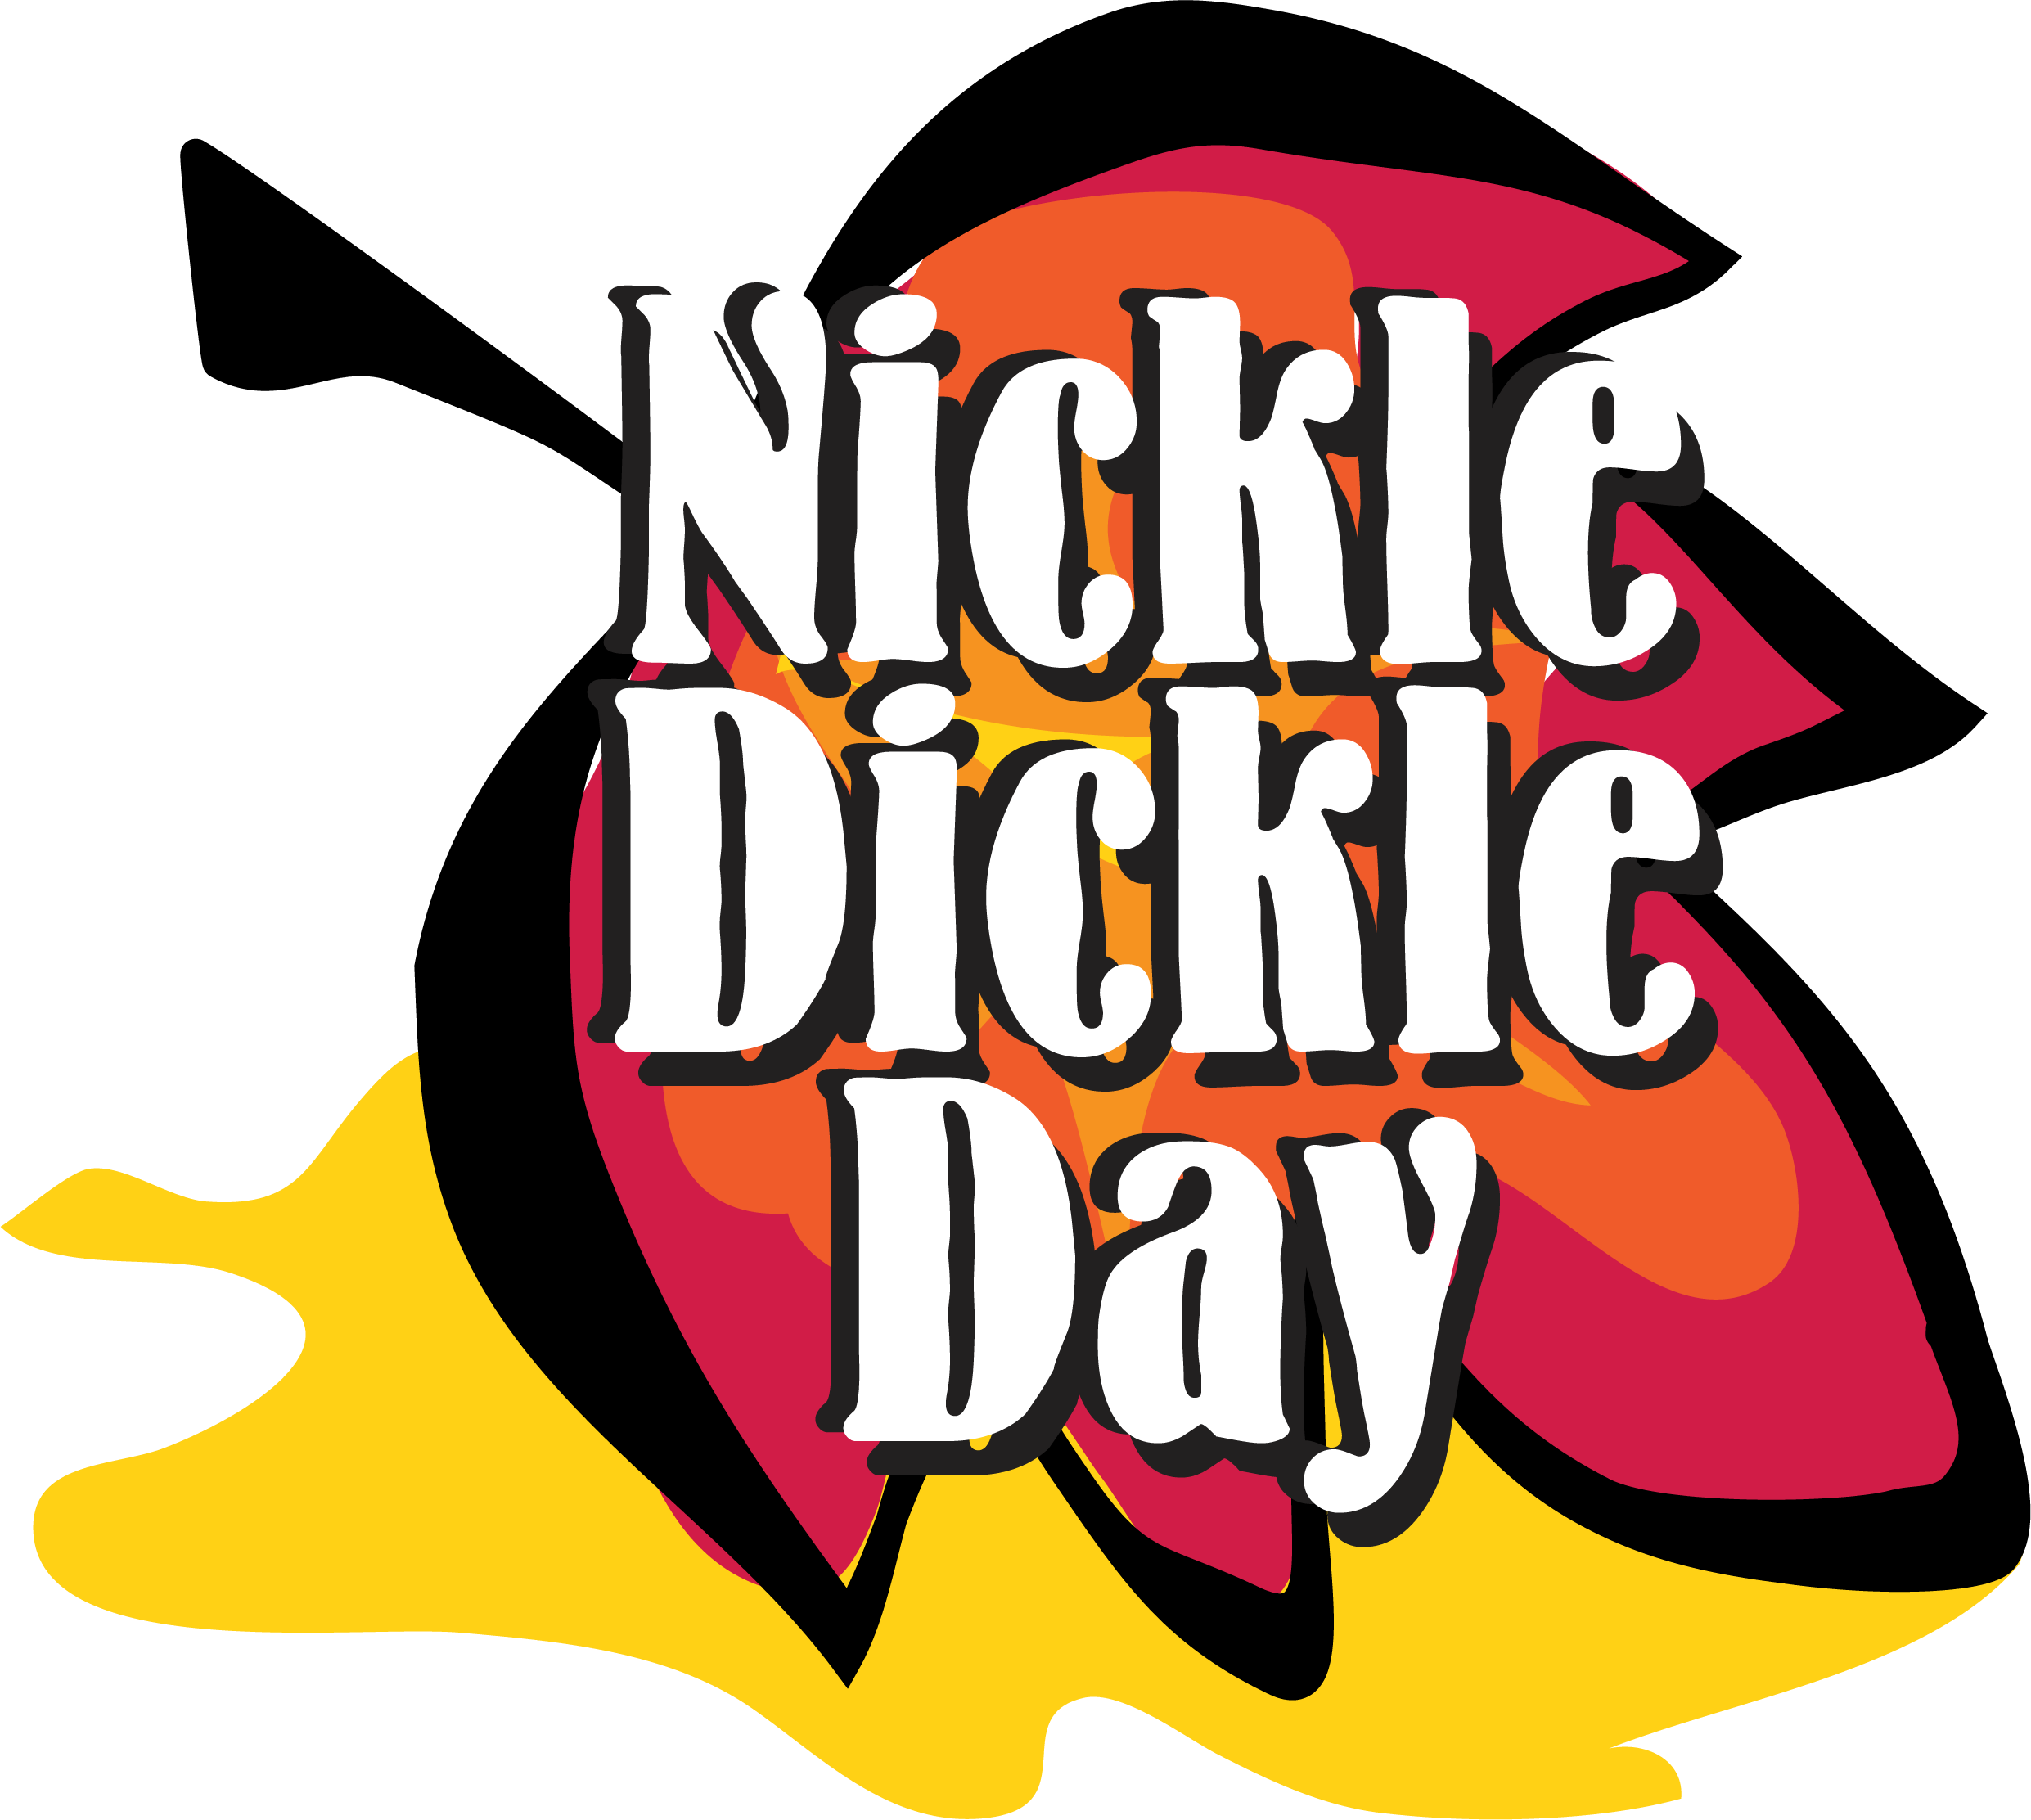 Nickle Dickle Day Logo